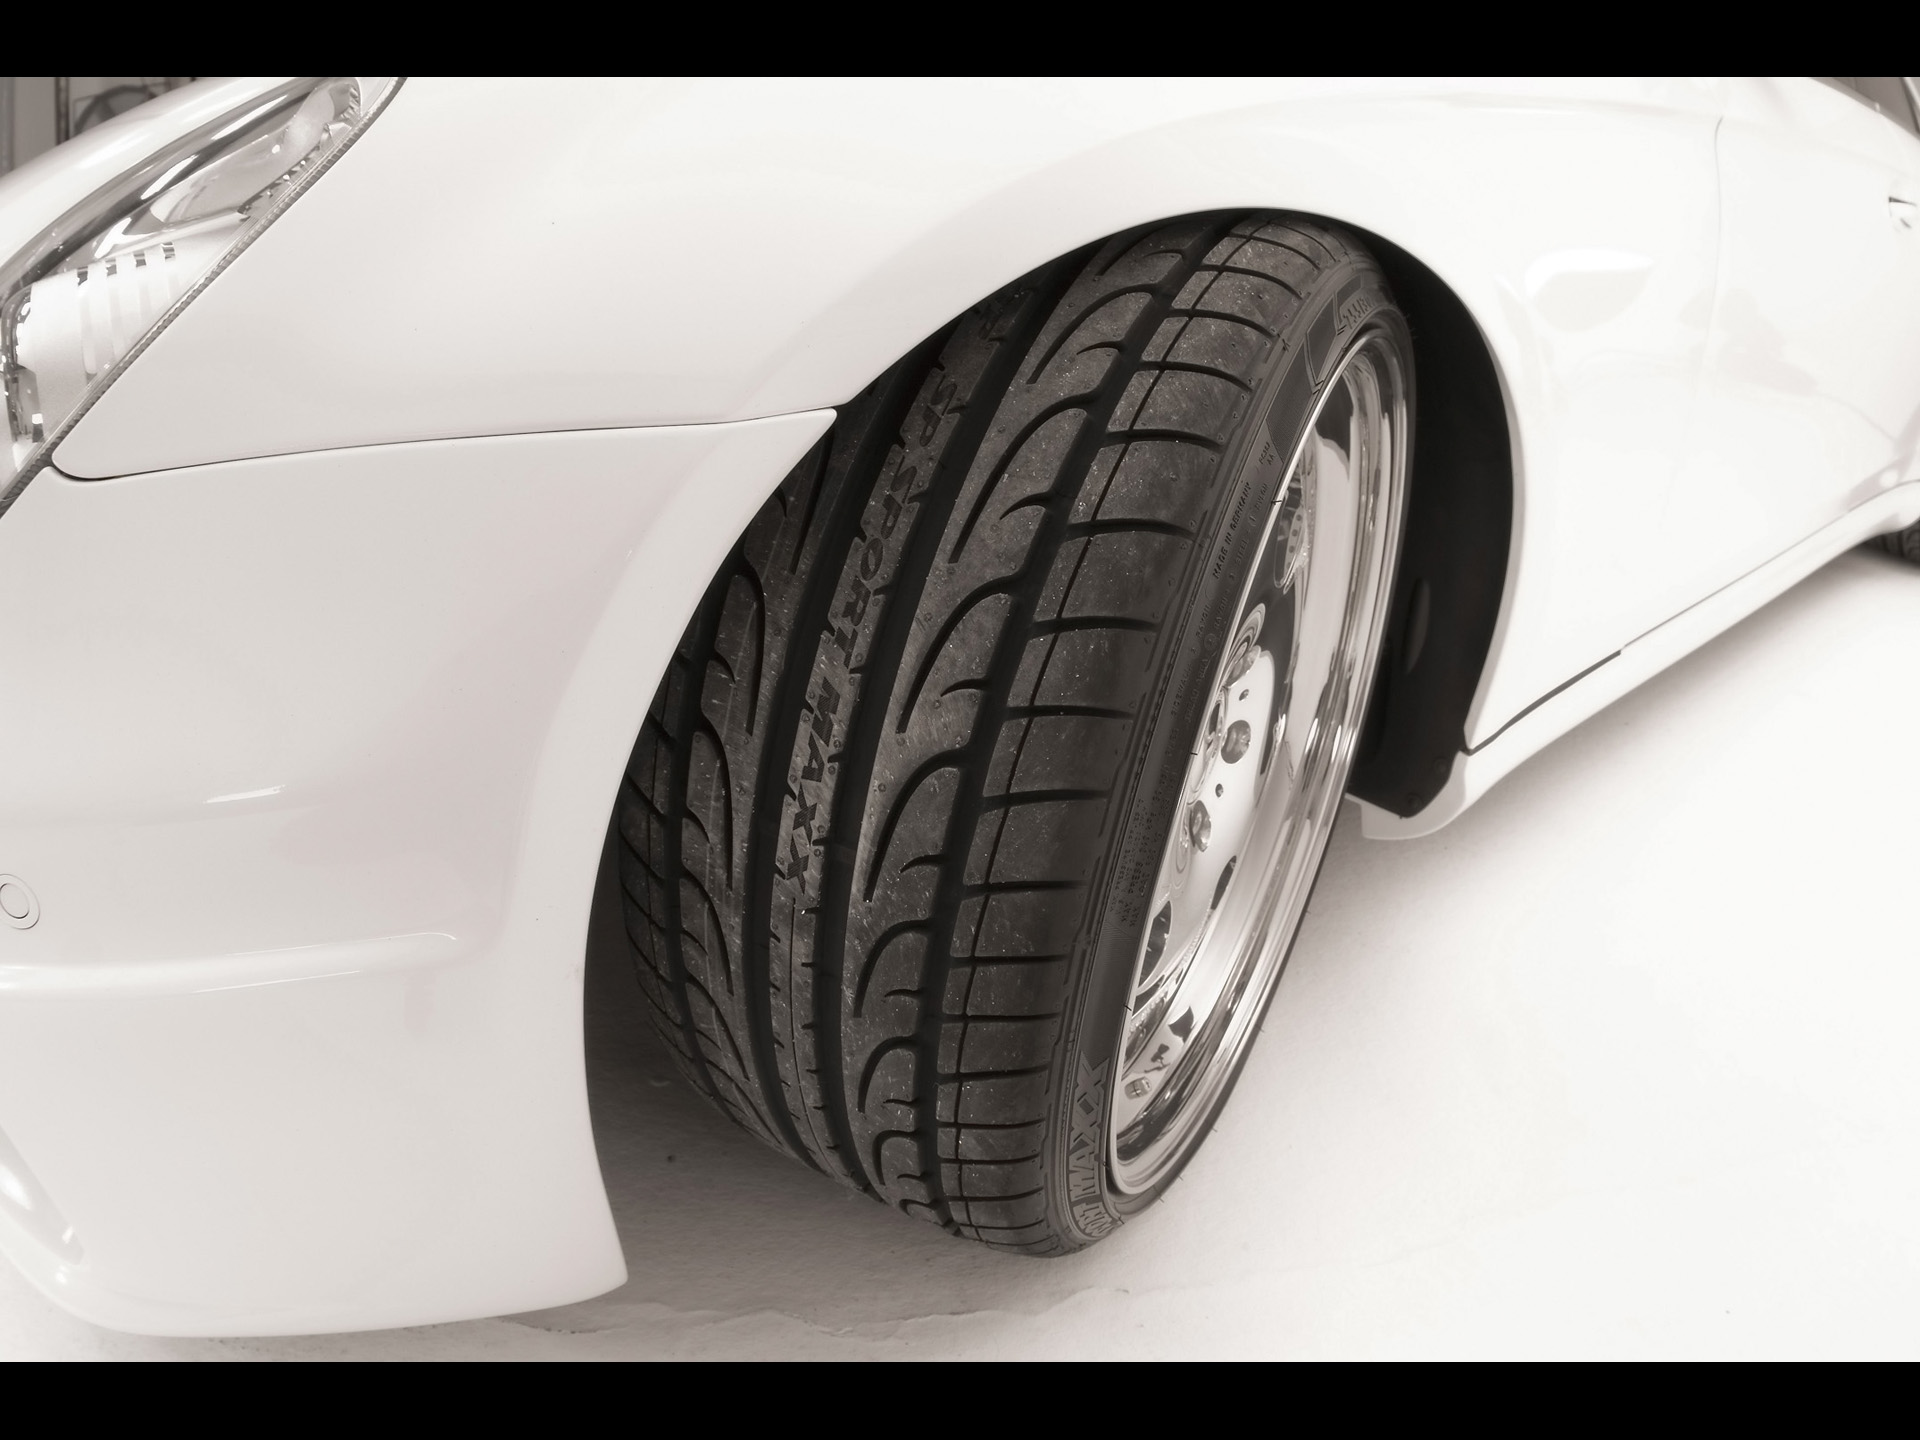 2009 Wheelsandmore Mercedes-benz Cls White Label - Tyre , HD Wallpaper & Backgrounds